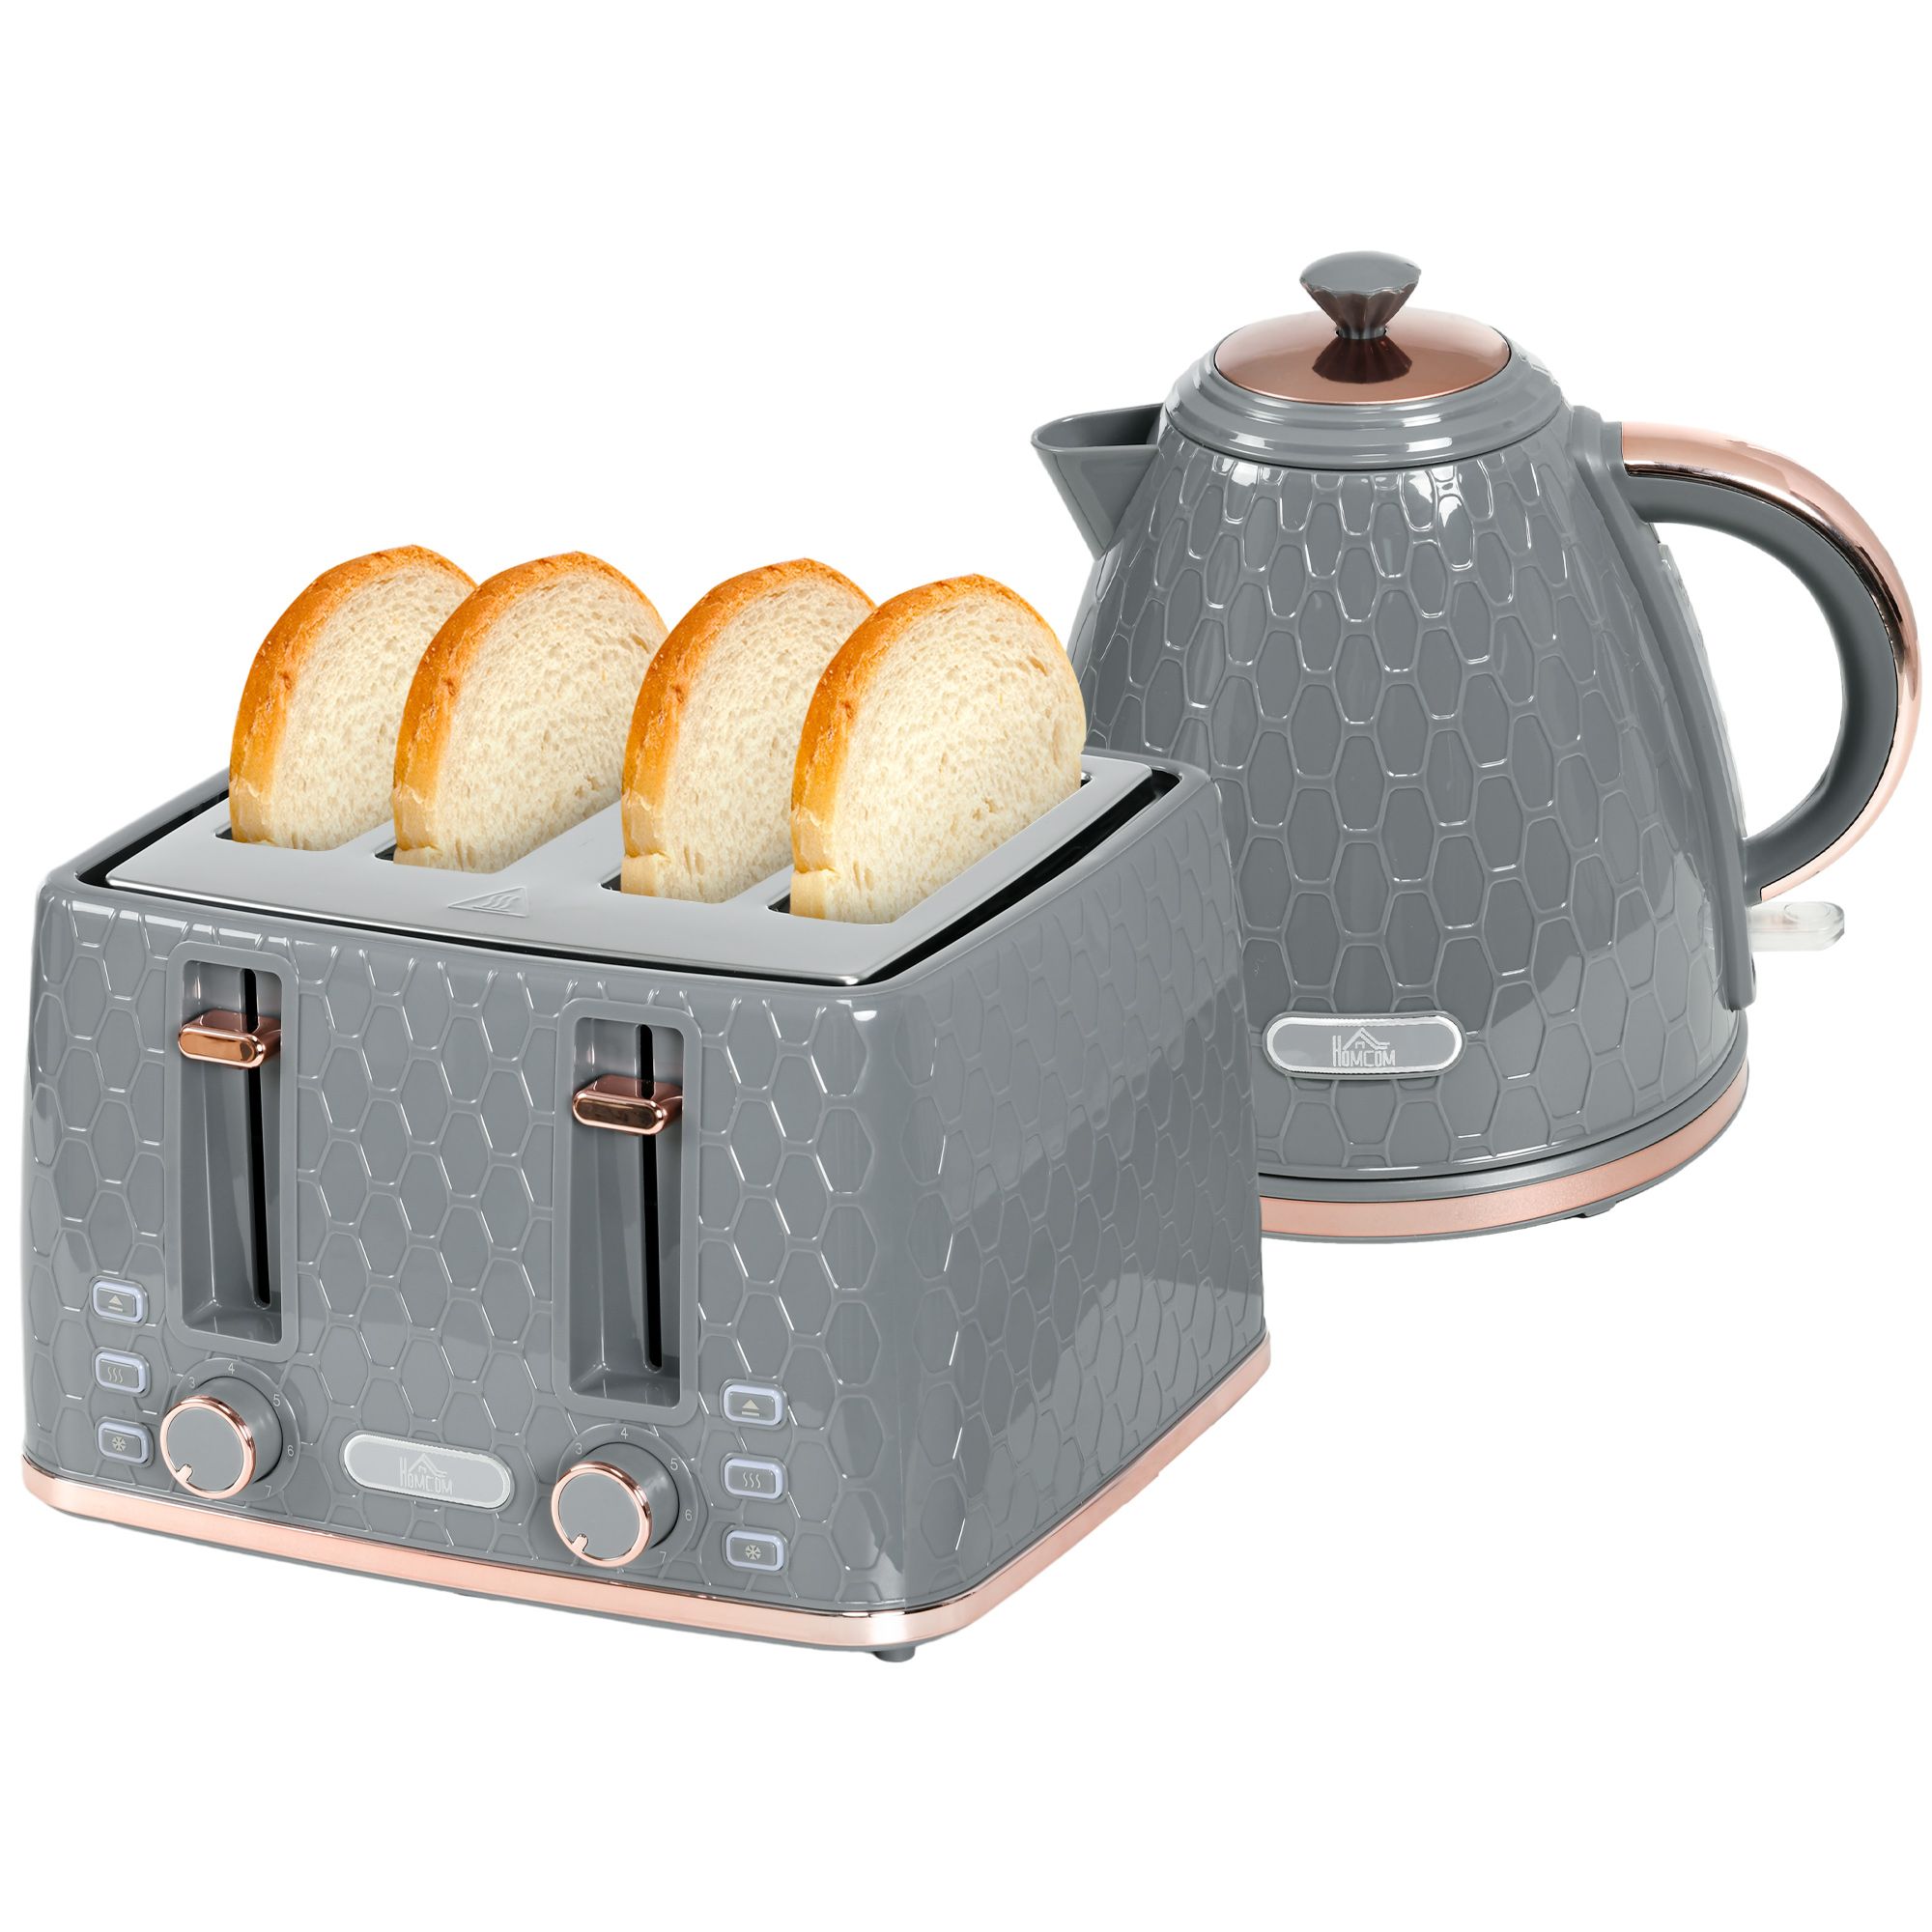 Homcom 1.7l 3000w Fast Boil Kettle & 4 Slice Toaster Set, Kettle And Toaster Set With 7 Browning Controls, Crumb Tray, Grey